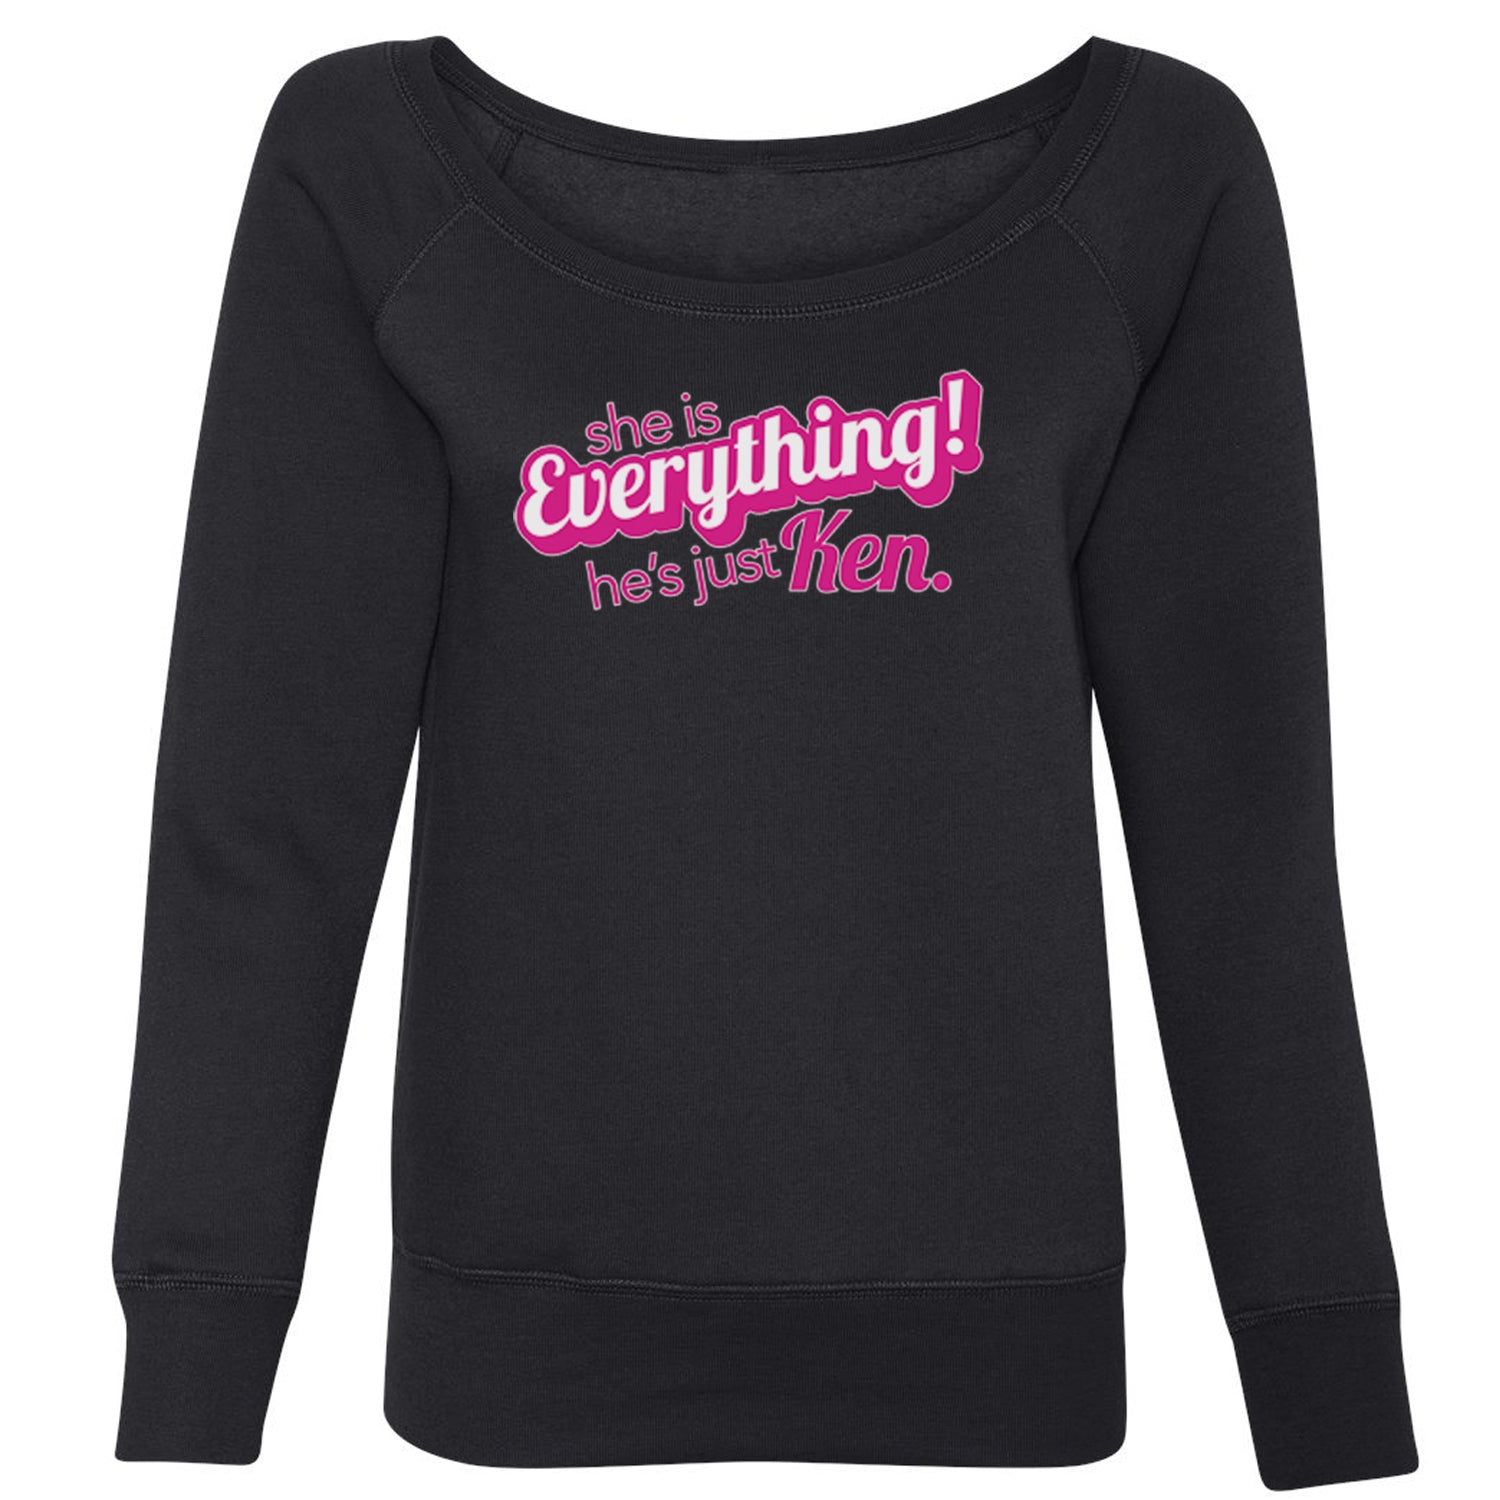 She's Everything, He's Just Ken Slouchy Off Shoulder Oversized Sweatshirt